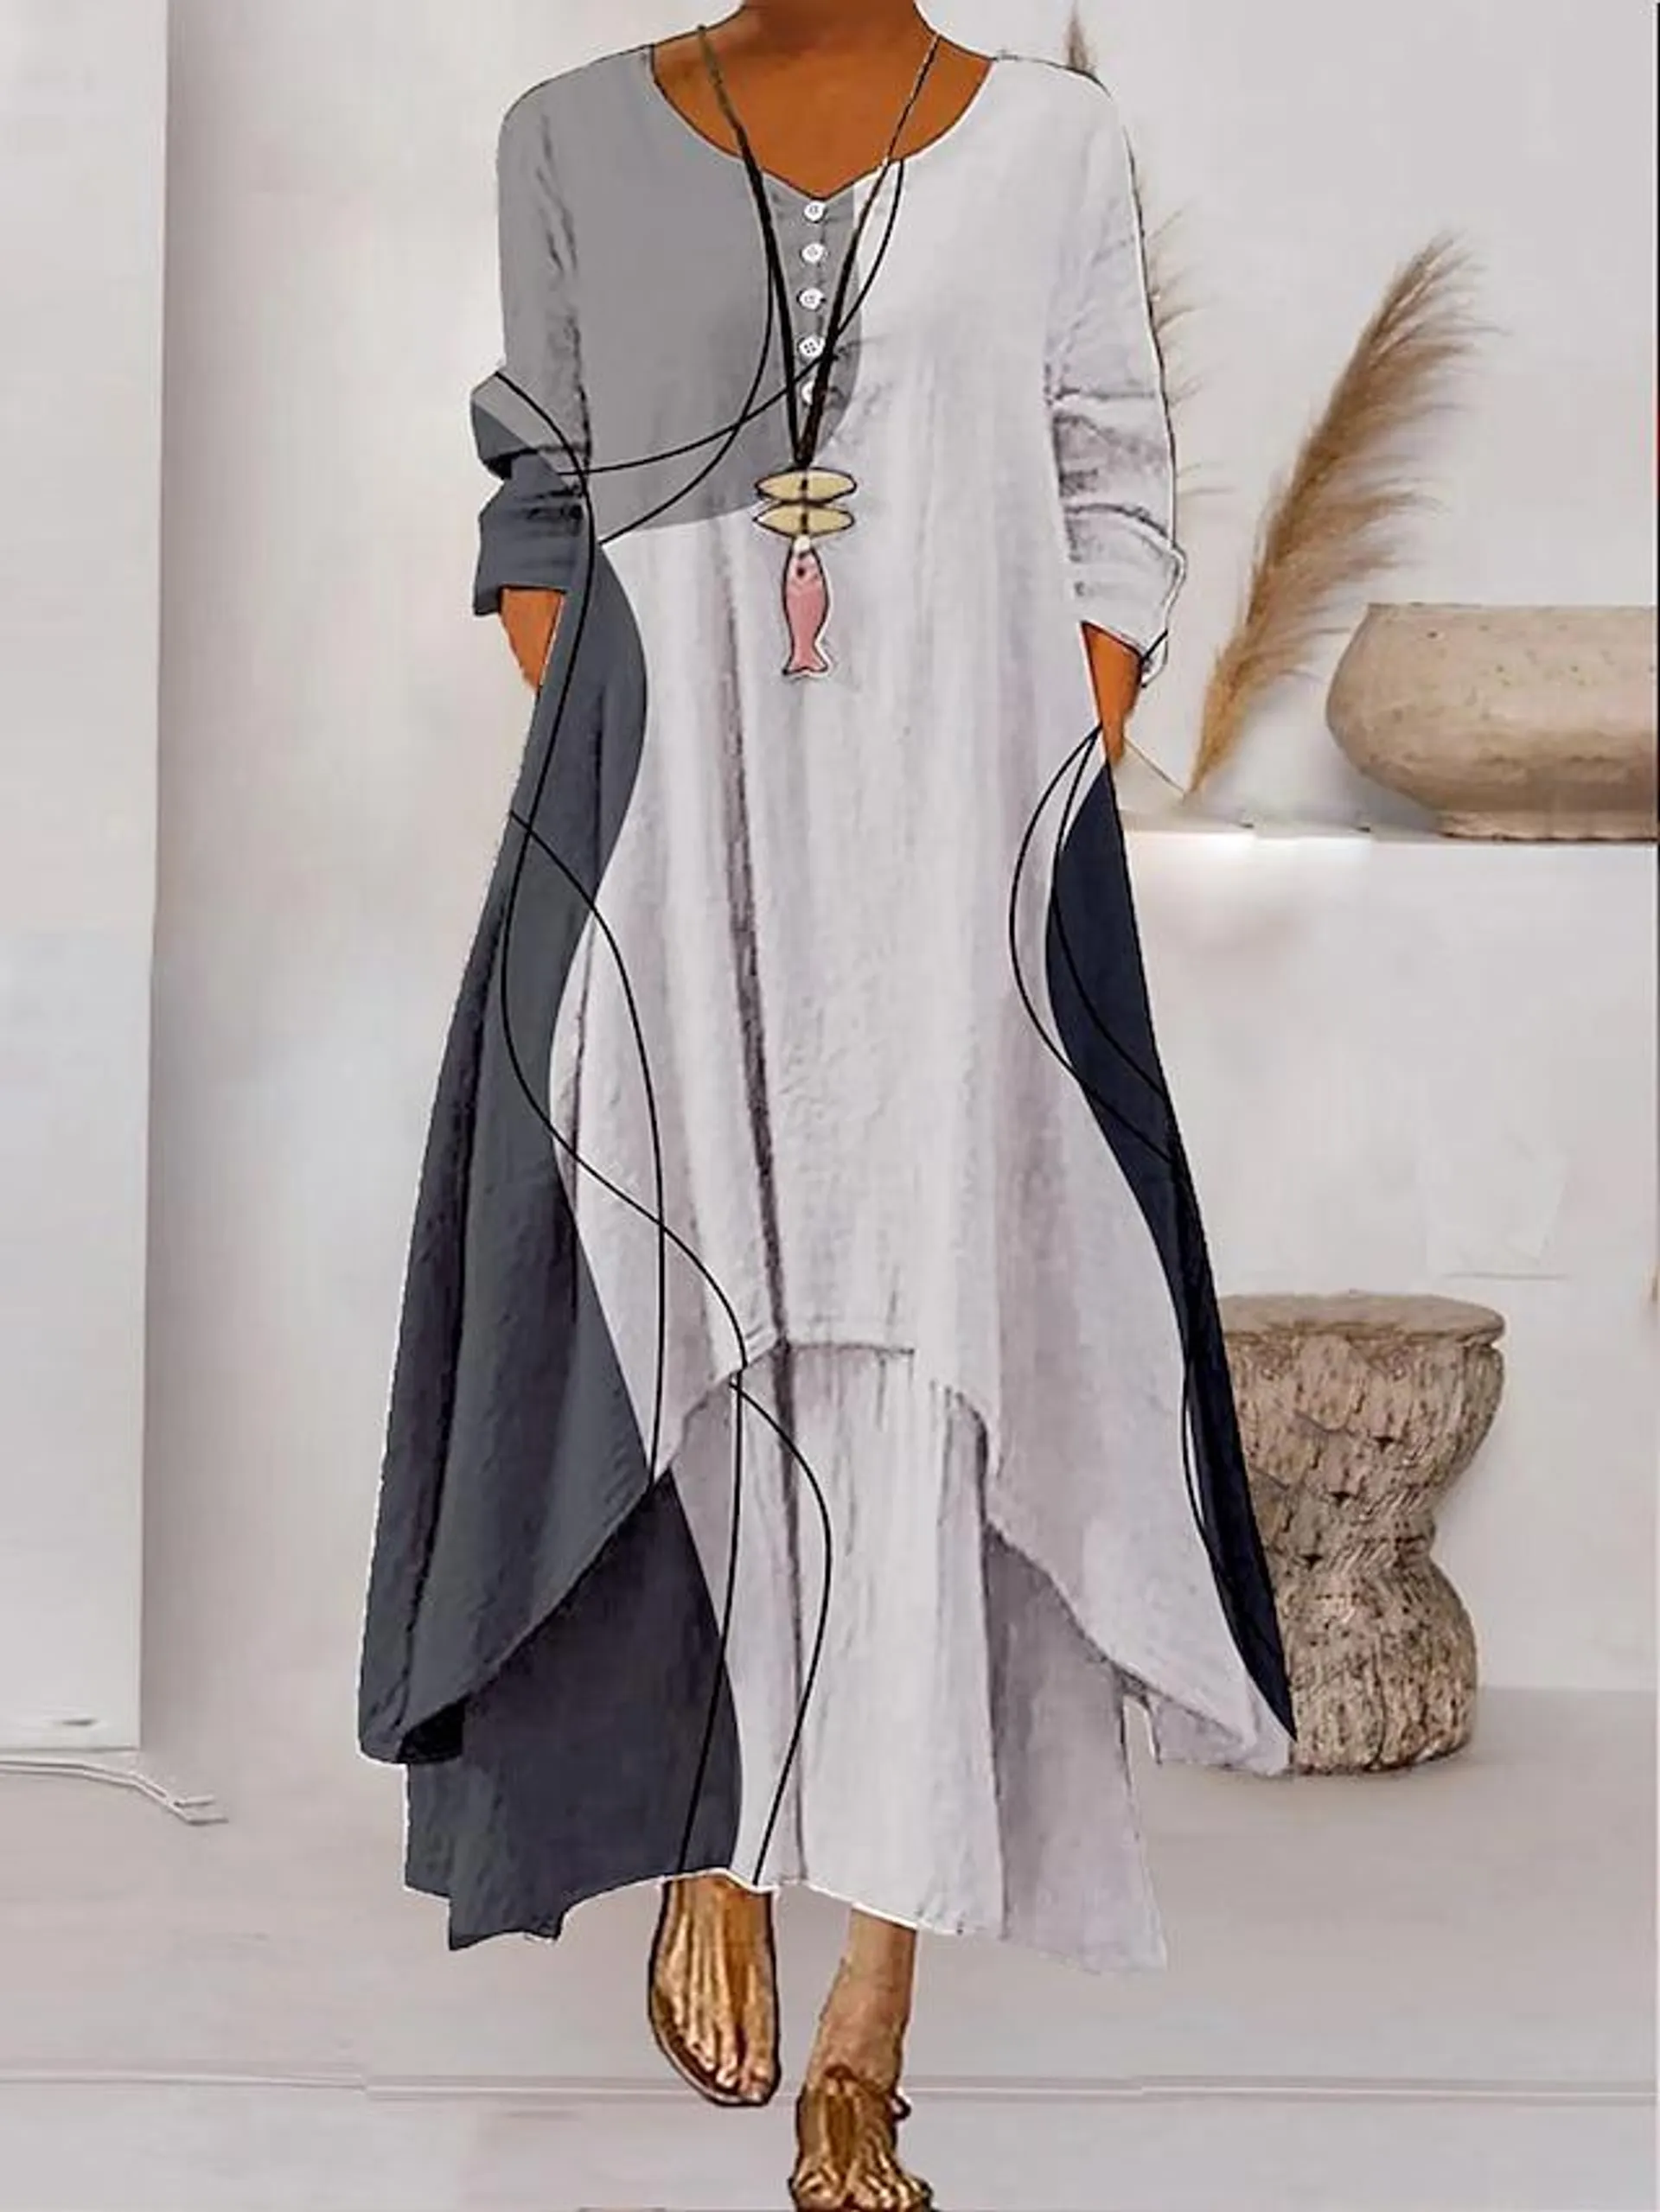 Women's Color Block Long Maxi Dress Button Layered Casual Dress Swing Dress Print Dress Fashion Modern Daily Vacation Weekend 3/4 Length Sleeve Crew Neck Dress Loose Fit Silver Black White